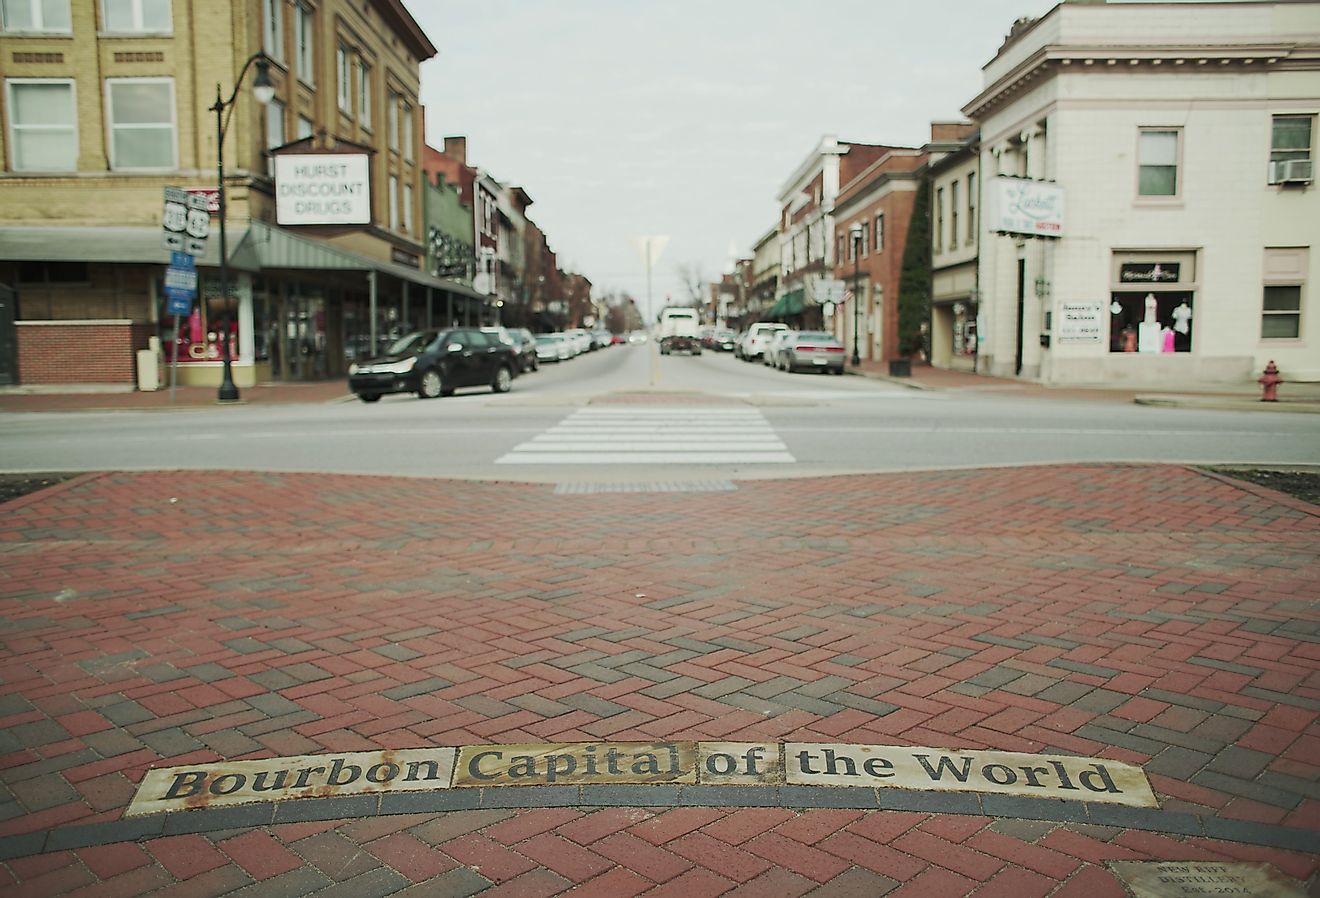 Bourbon capital of the world sign and downtown, Bardstown, Kentucky. Image credit University of College via Shutterstock